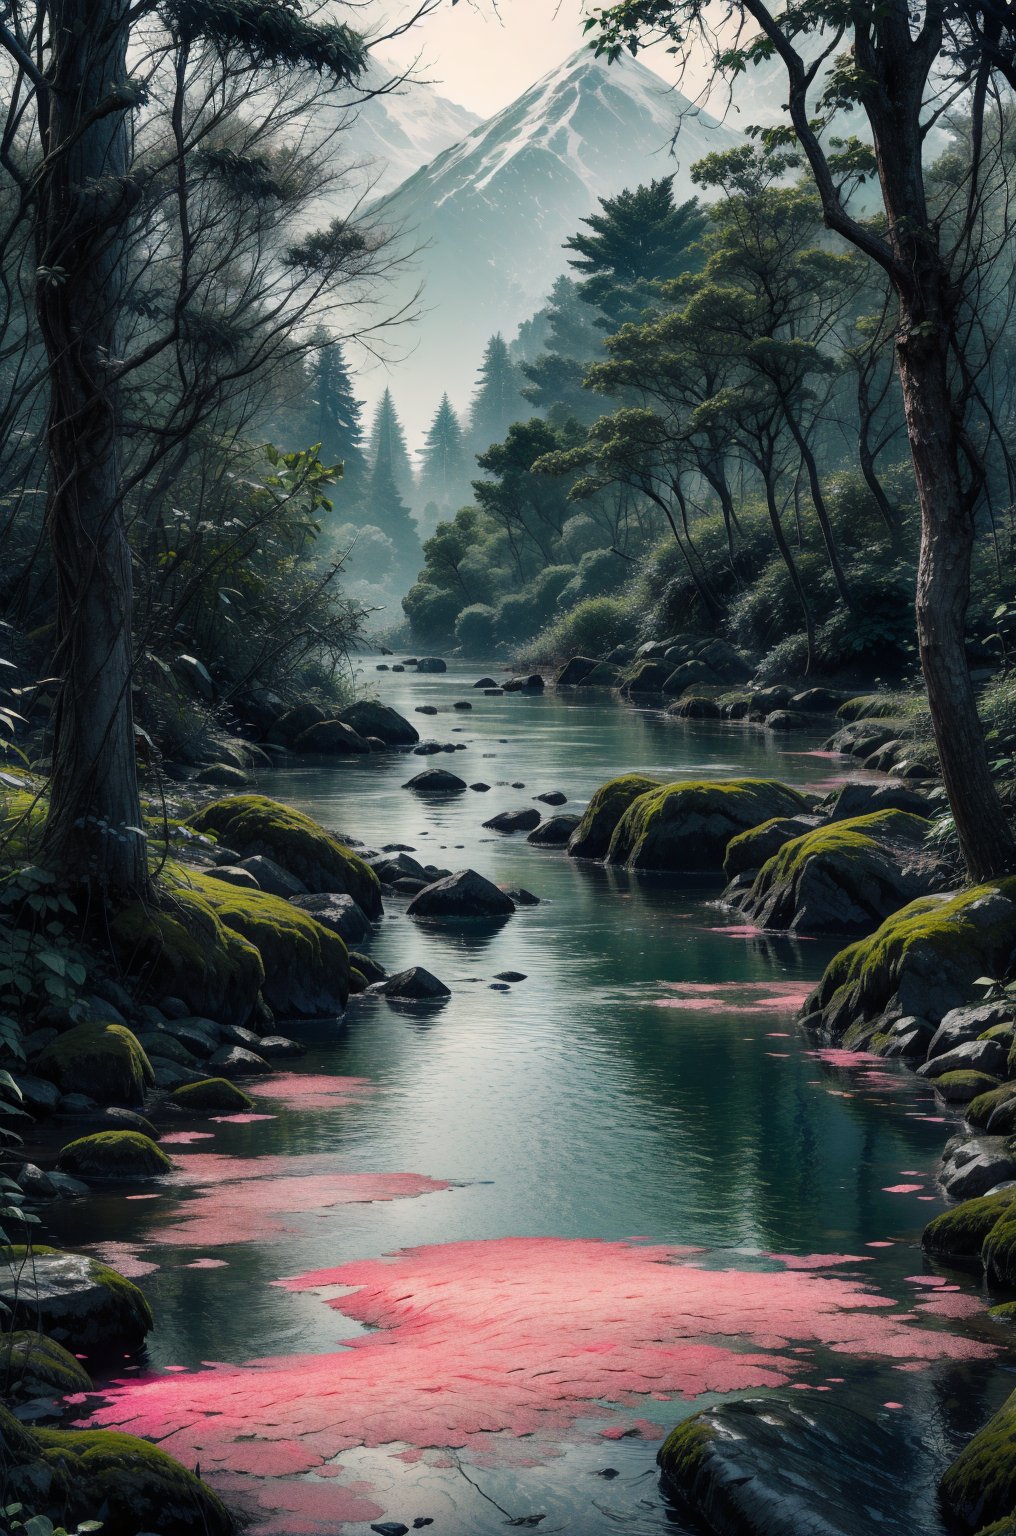 A calm, dark forest at night, illuminated by soft blue light filtering through the trees overhead. A small multi-level mountain stream meanders through the center of the forest, reflecting the heavenly glow on its surface. Delicate pink, yellow and red flowers bloom on either side of the stream, adding color to the monochrome scene. The forest floor is covered with moss and ferns, creating the overall feeling of a mystical, enchanted forest. The moonlight falls dimly on the water, cutting through the silence of the night. An old cherry tree, standing quietly by the water, softly crumbles under the gusts of a weak wind, its pink petals, lifted by a breath of light wind, travel through the forest,DonMD34thM4g1c,nhaythoaty,fantasy00d